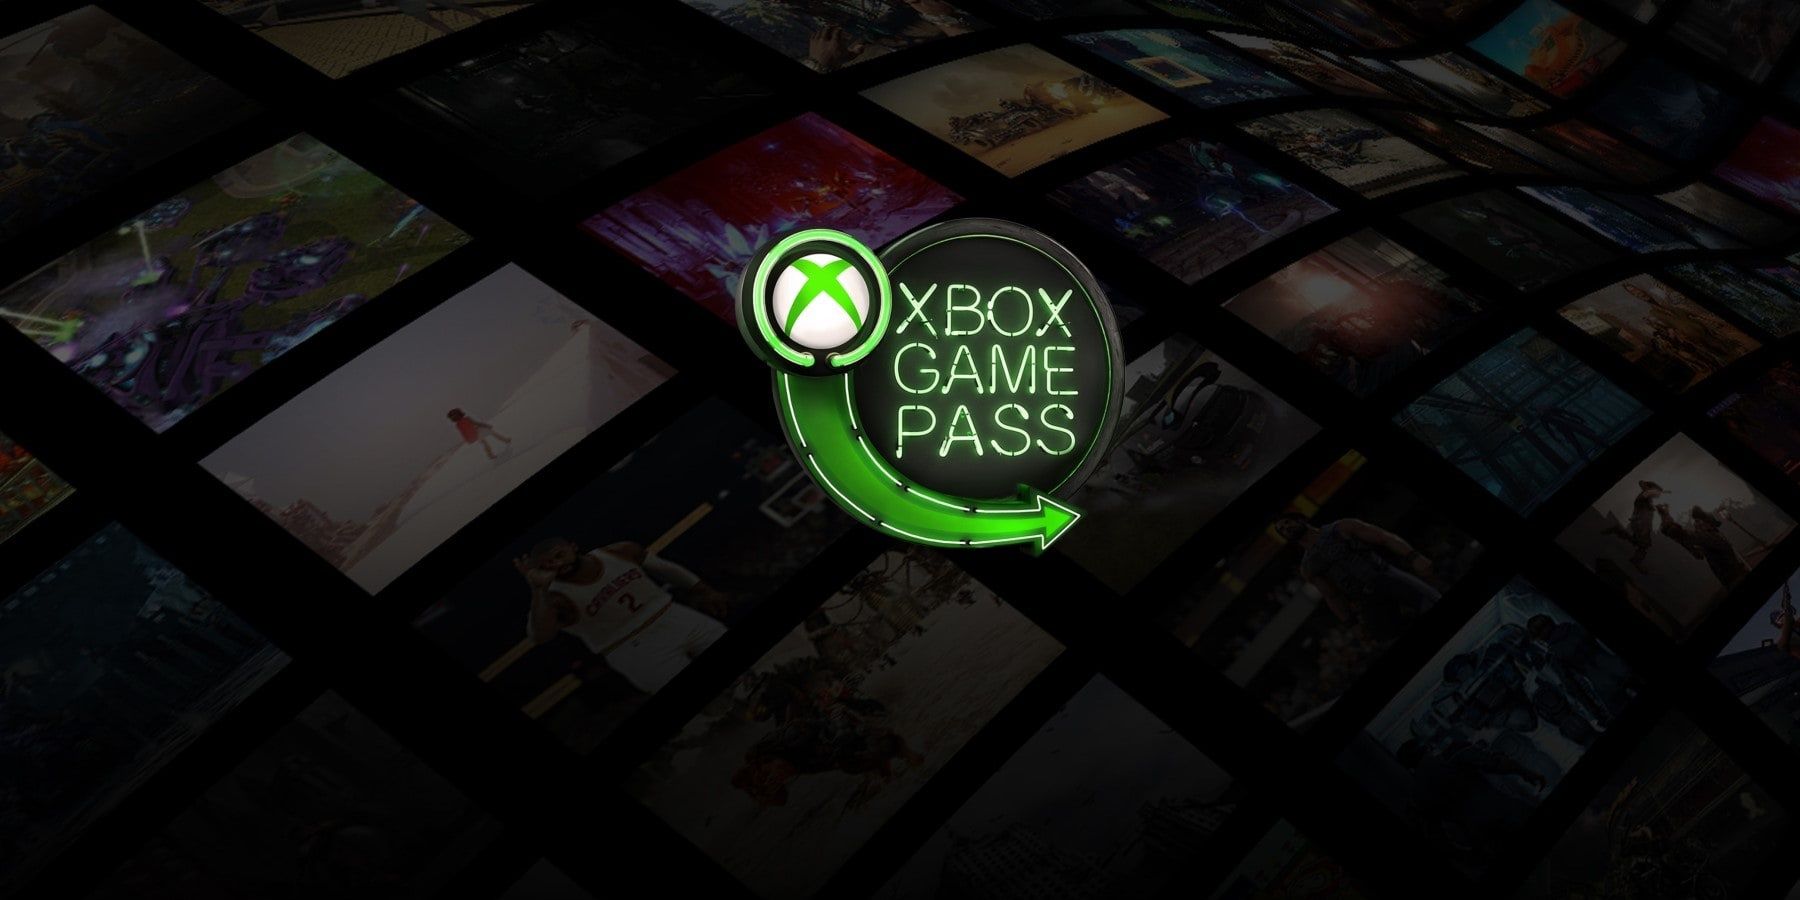 xbox game pass with background filled with showcase of screenshots from different games